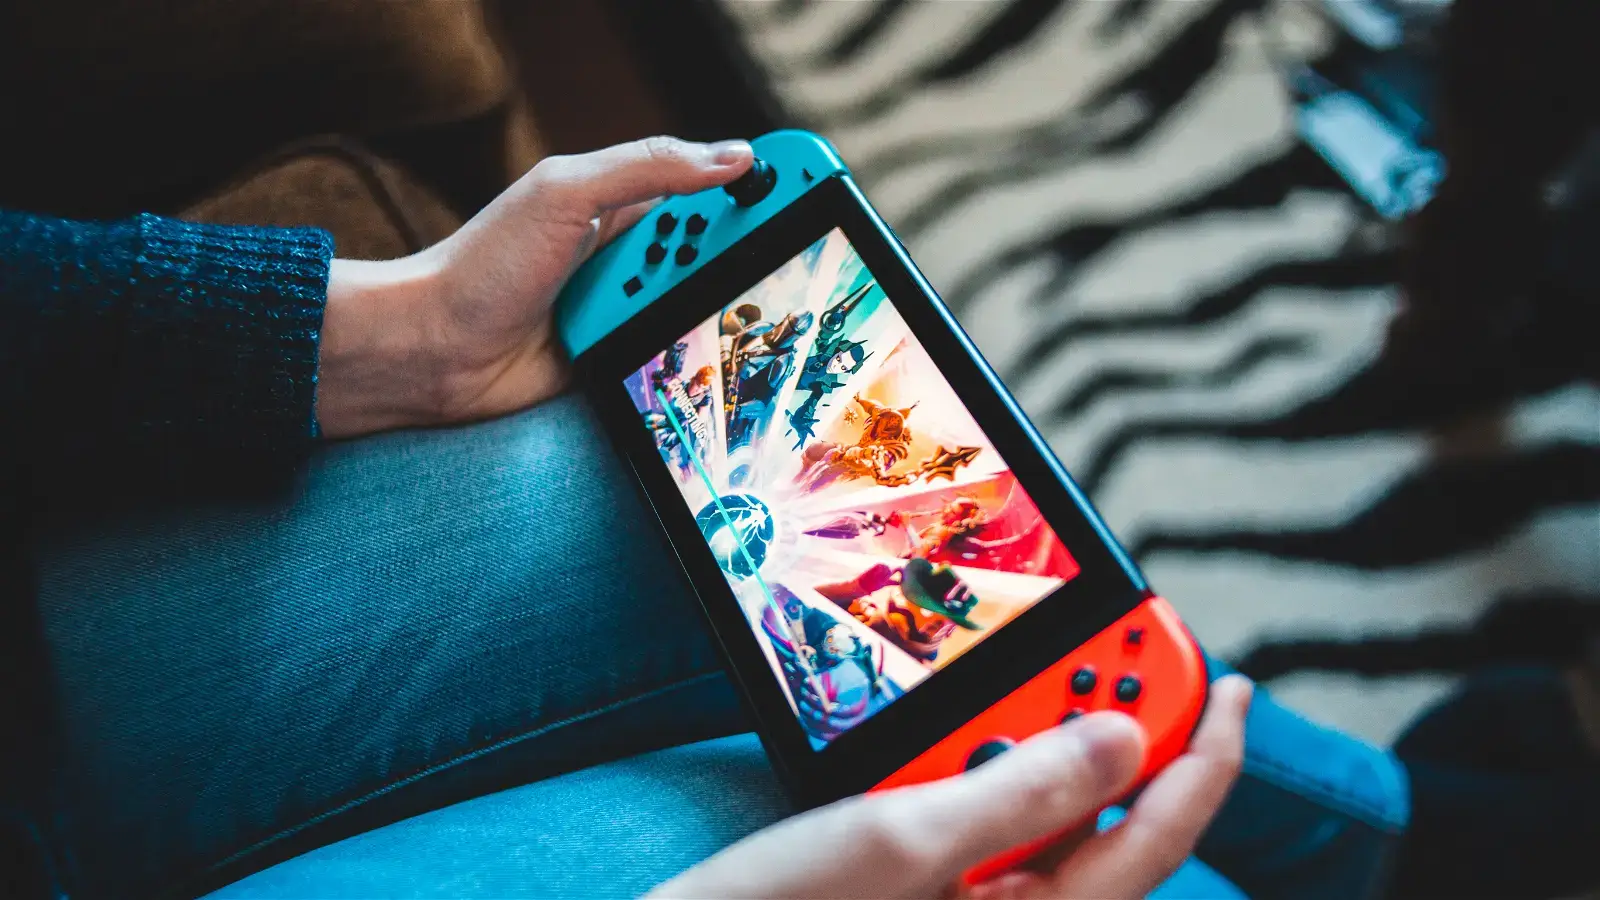 New EU law requires replaceable batteries in handheld consoles by 2027